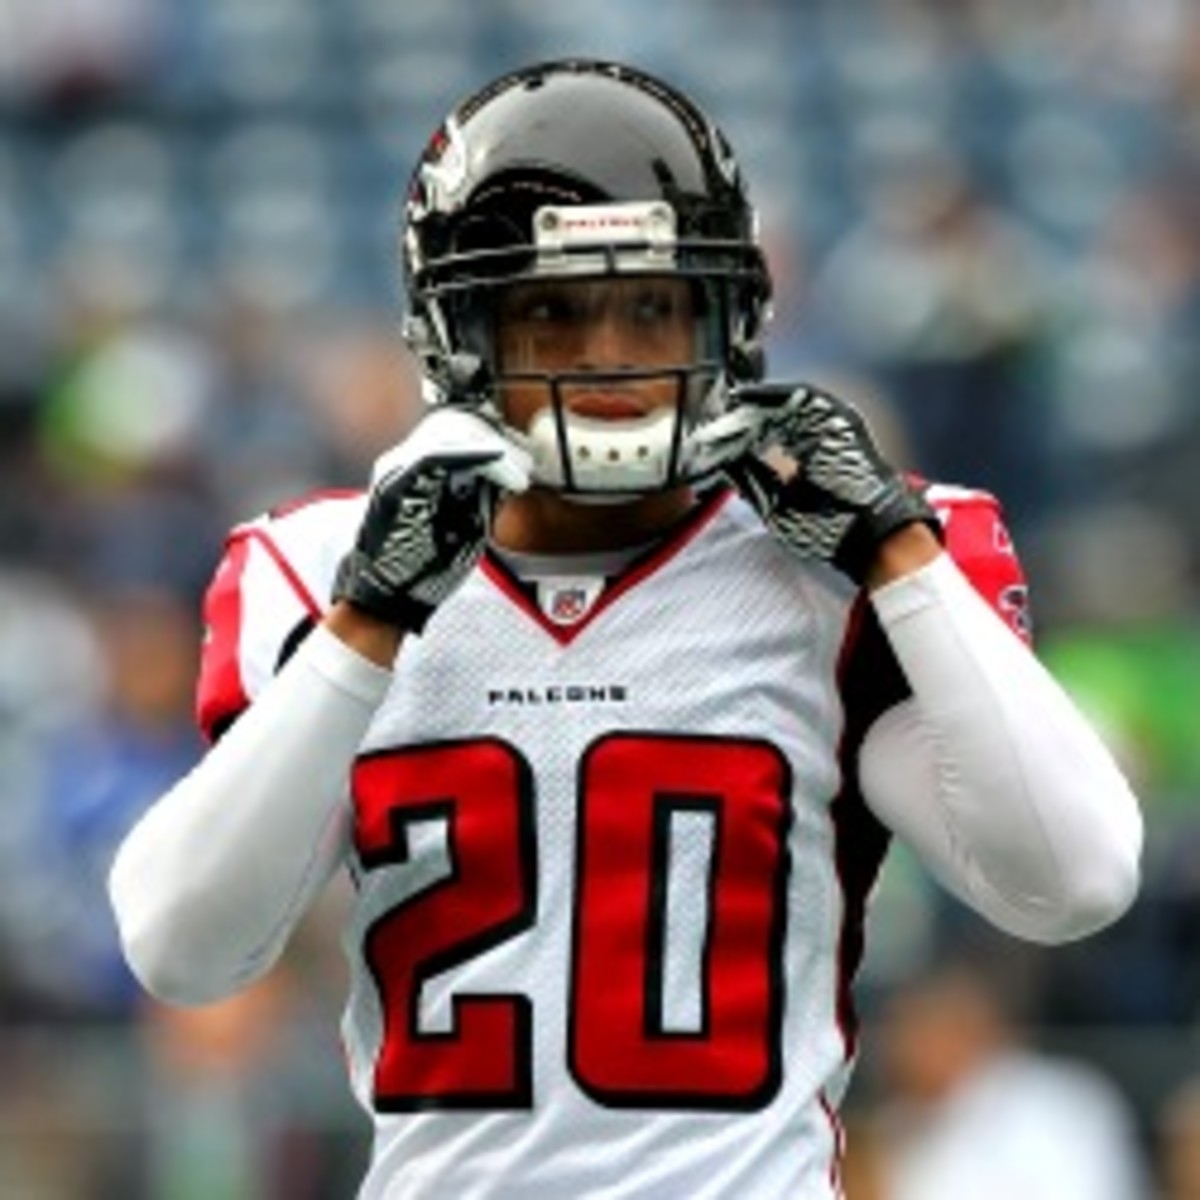 Falcons cornerback Brent Grimes is out for the remainder of the season due ...